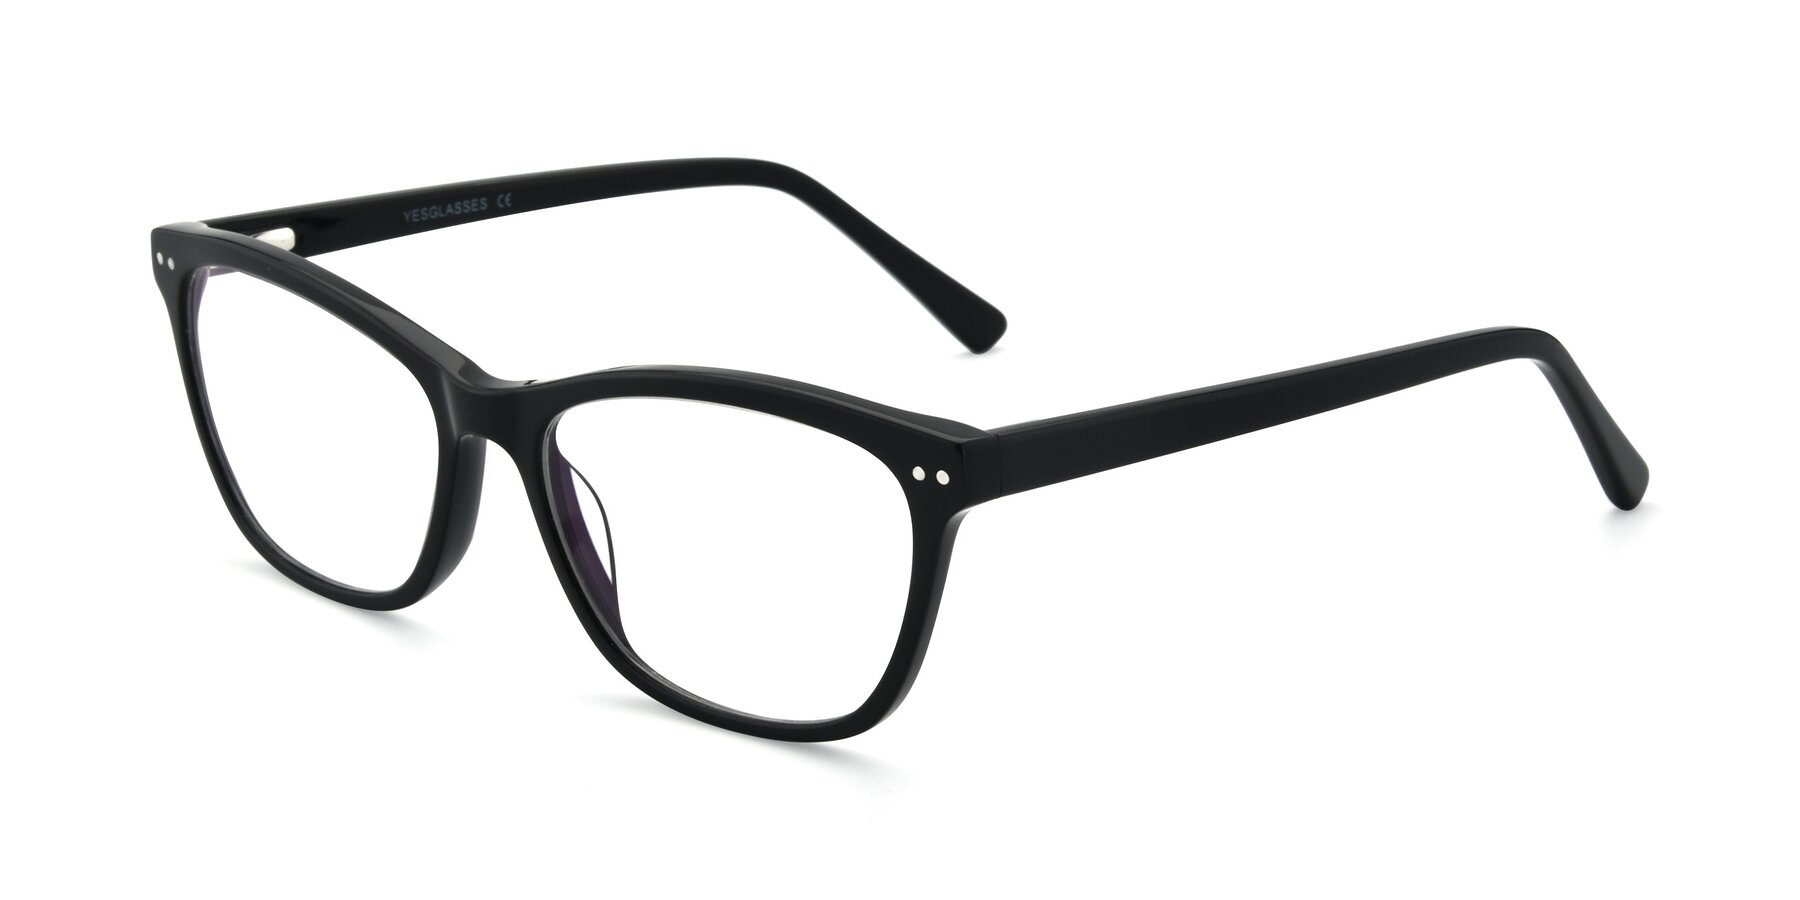 Angle of 17350 in Black with Clear Eyeglass Lenses